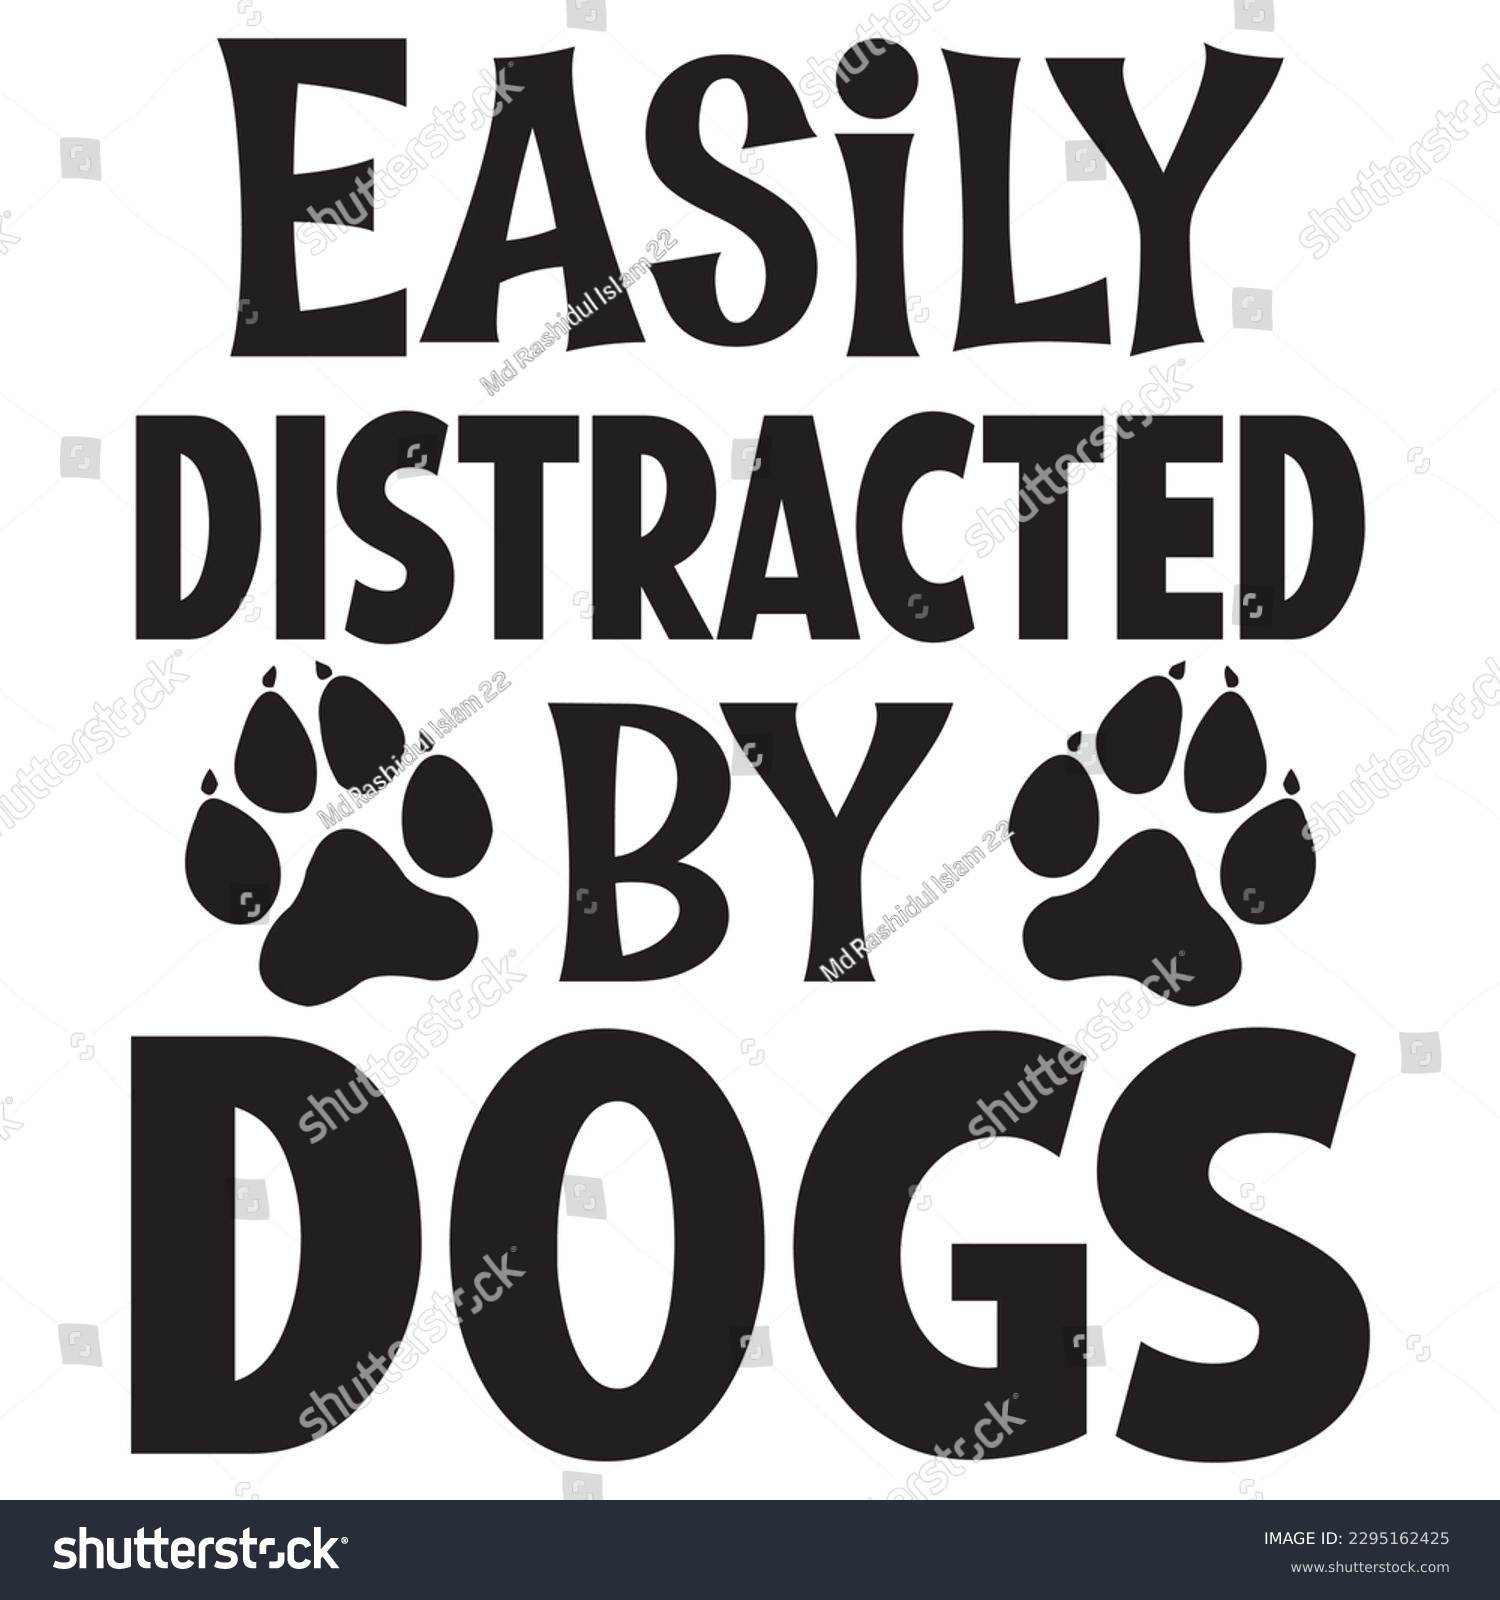 SVG of Easily Distracted By Dogs SVG Design Vector file. svg